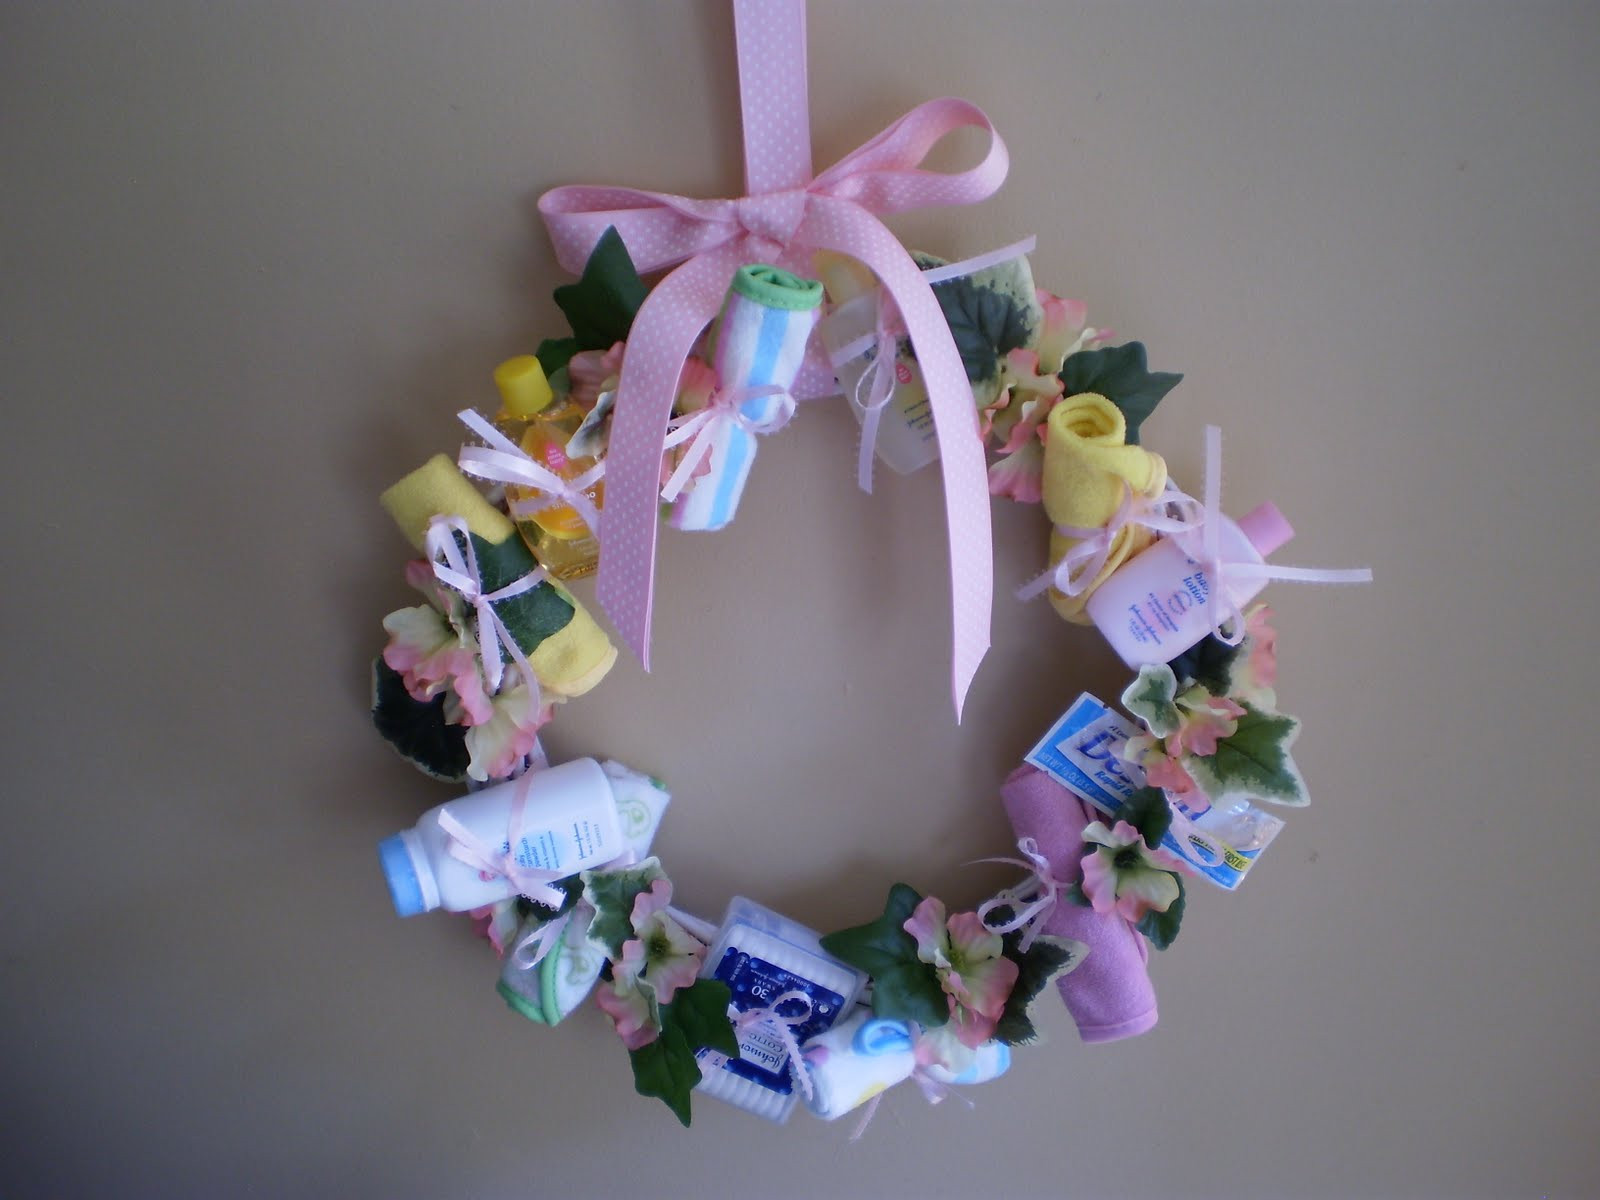 Gift Ideas For A Baby Girl
 e Simple Country Girl A Neat Baby Shower Gift Idea